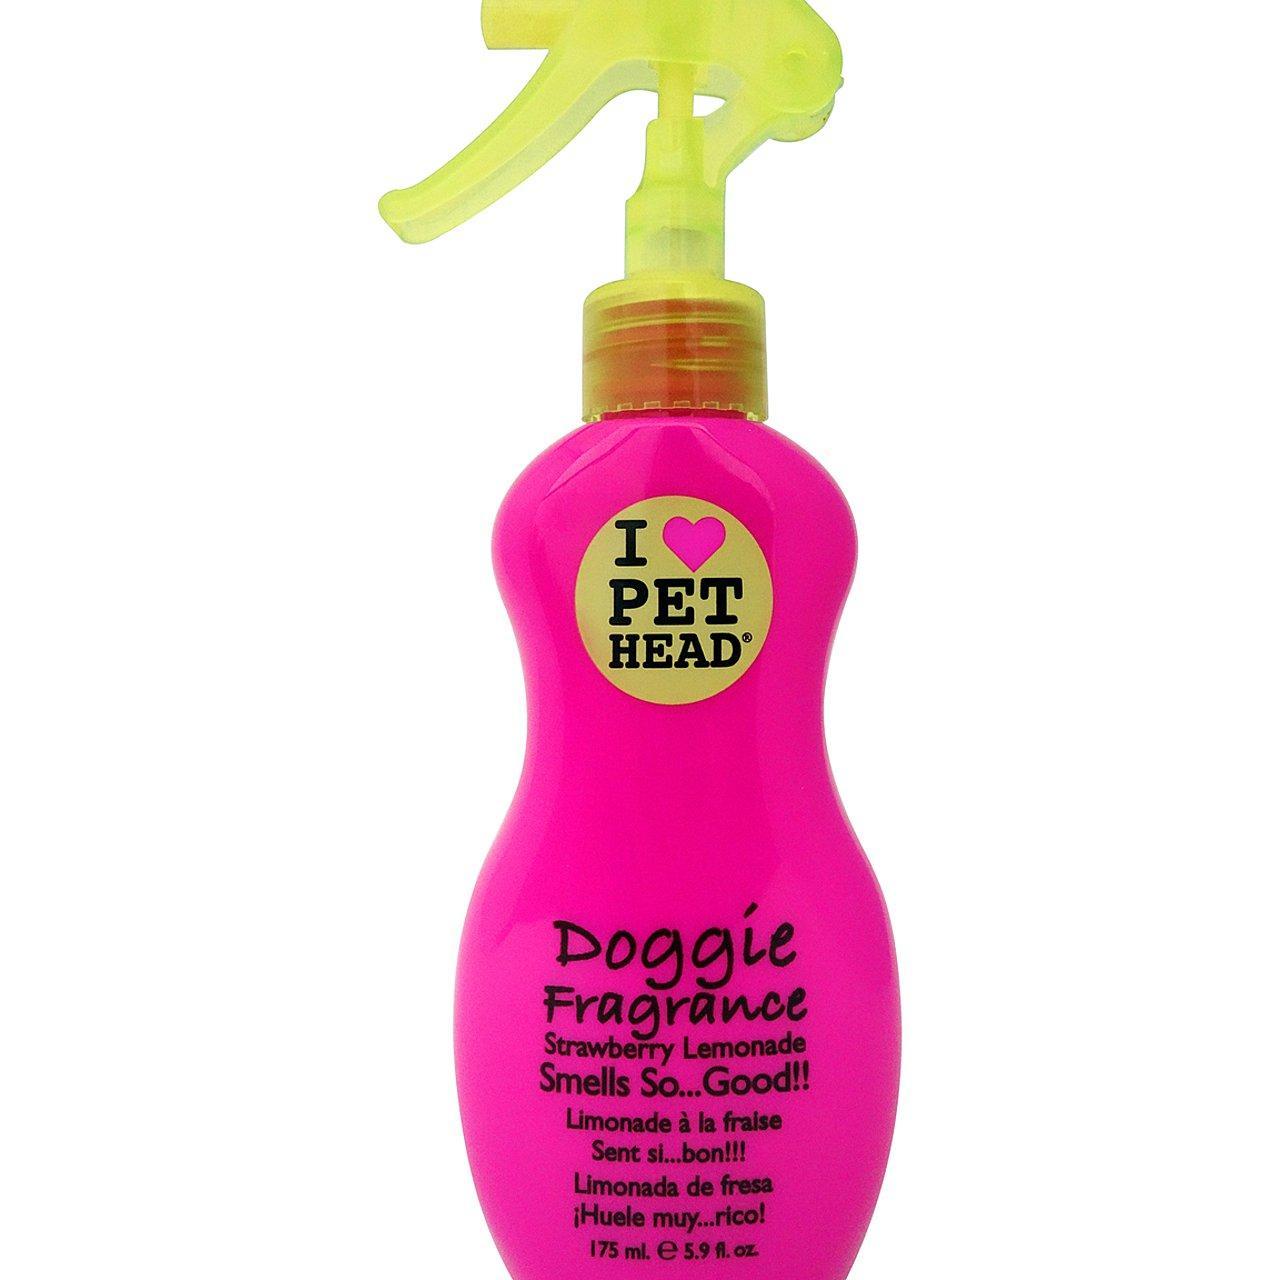 An image of Pet Head Doggie Fragrance